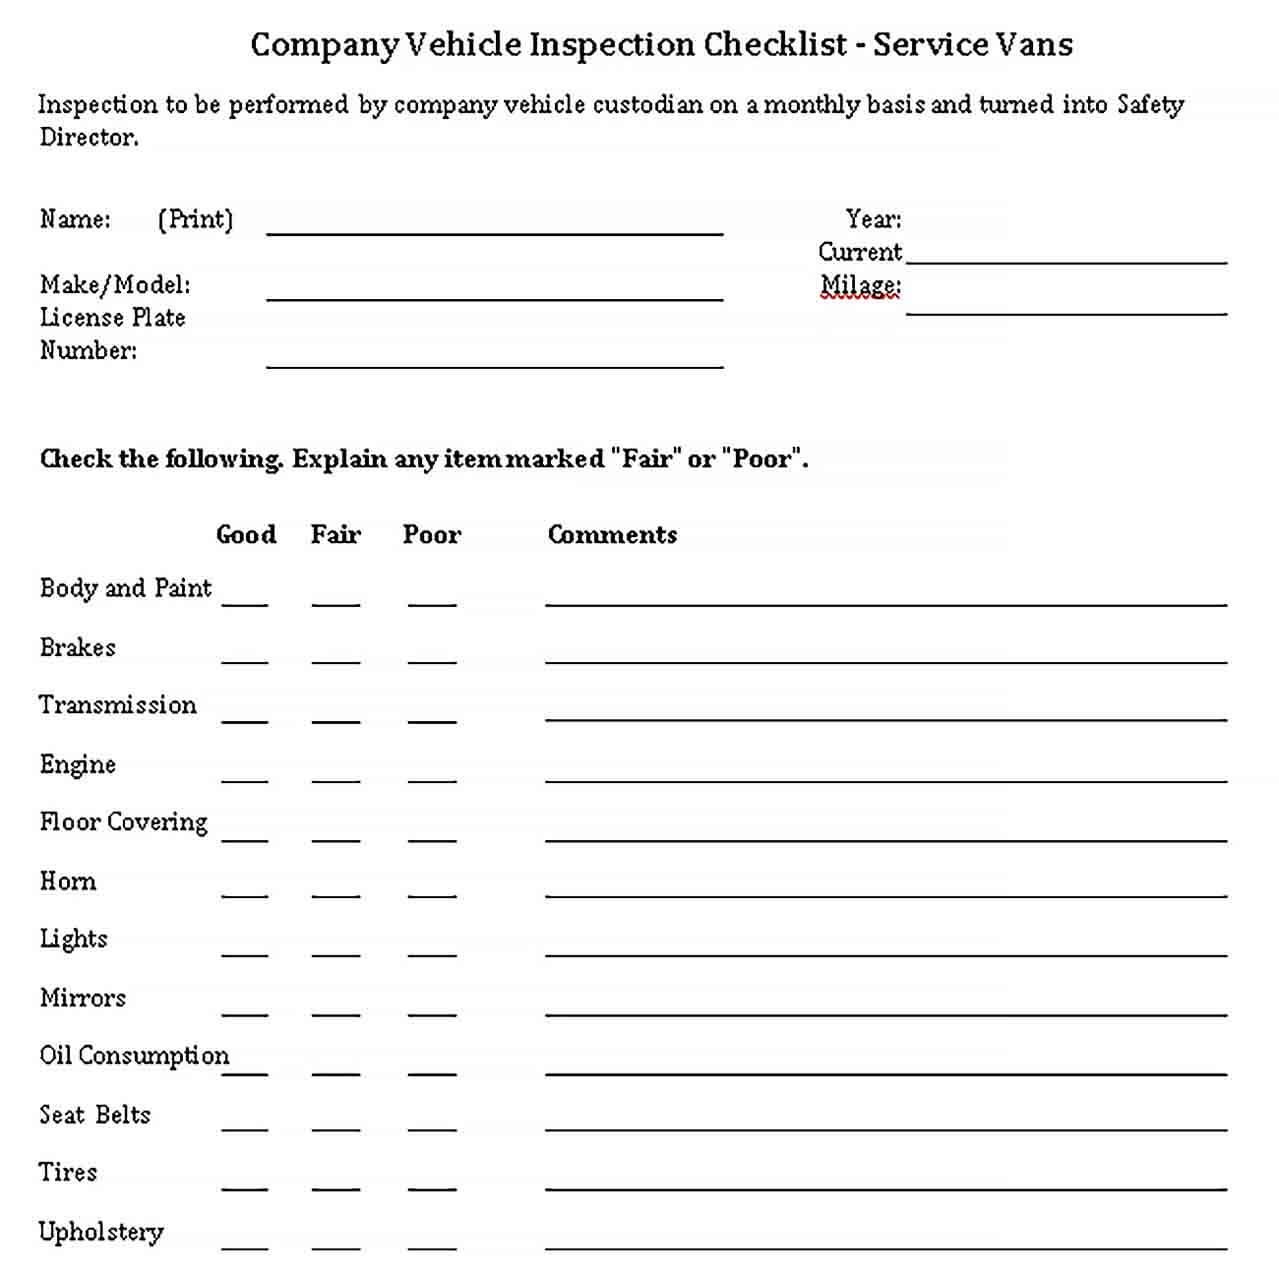 Vehicle Checklist Template  With Printer Maintenance Checklist Template For Printer Maintenance Checklist Template